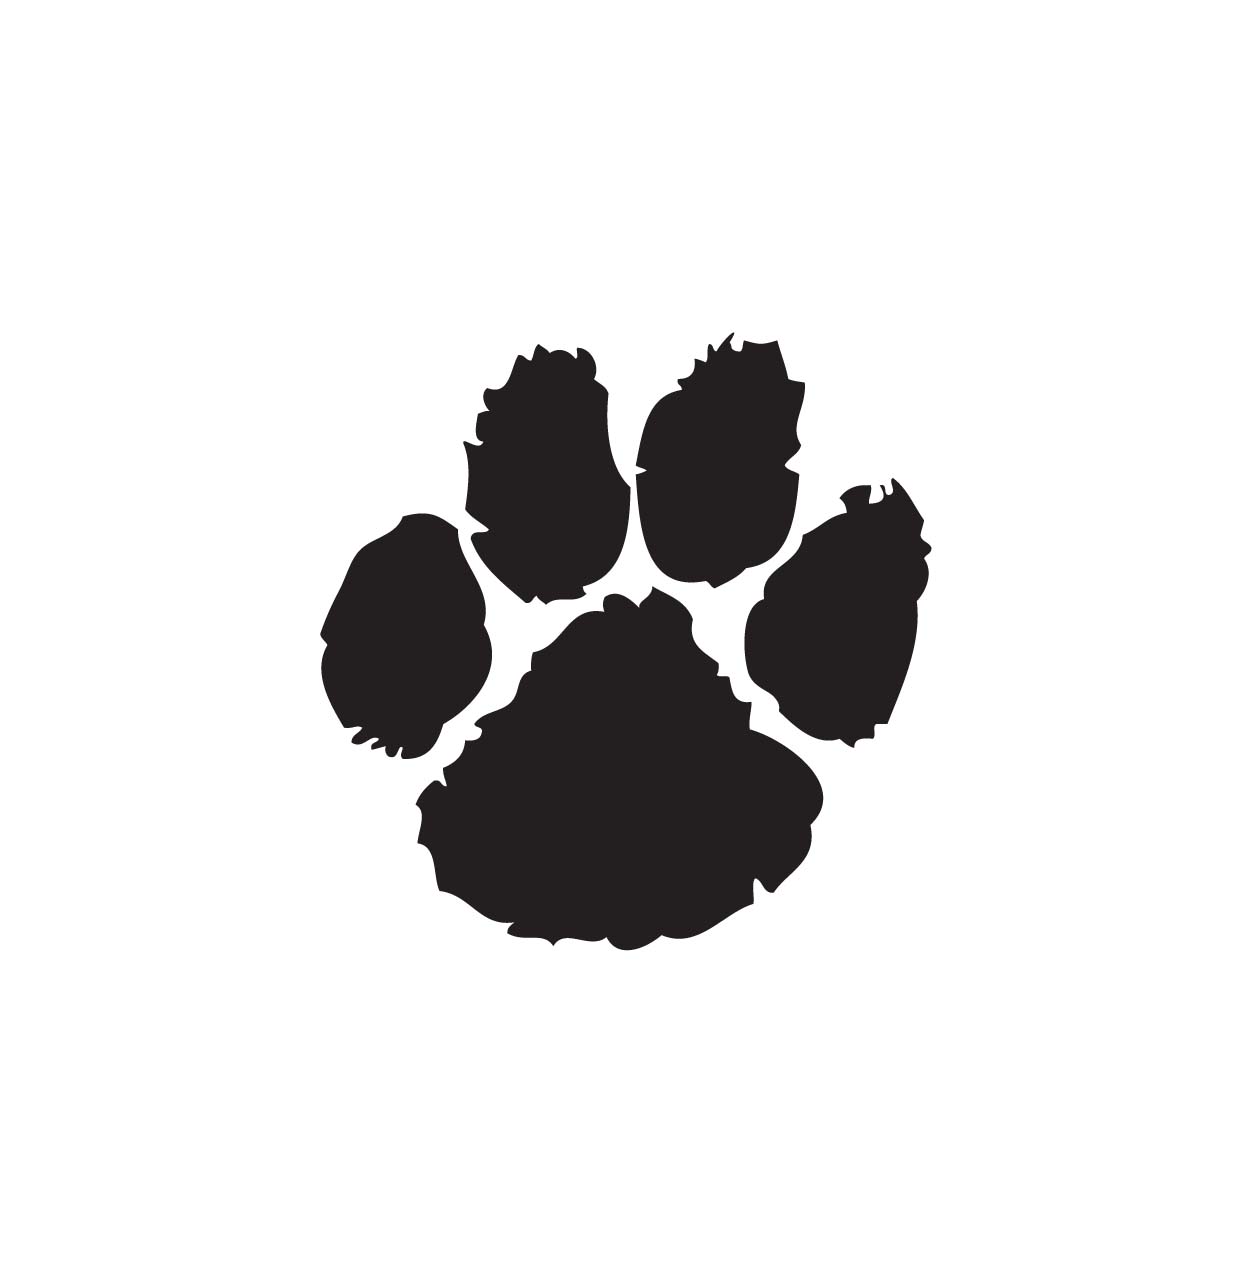 Paw print image clipart